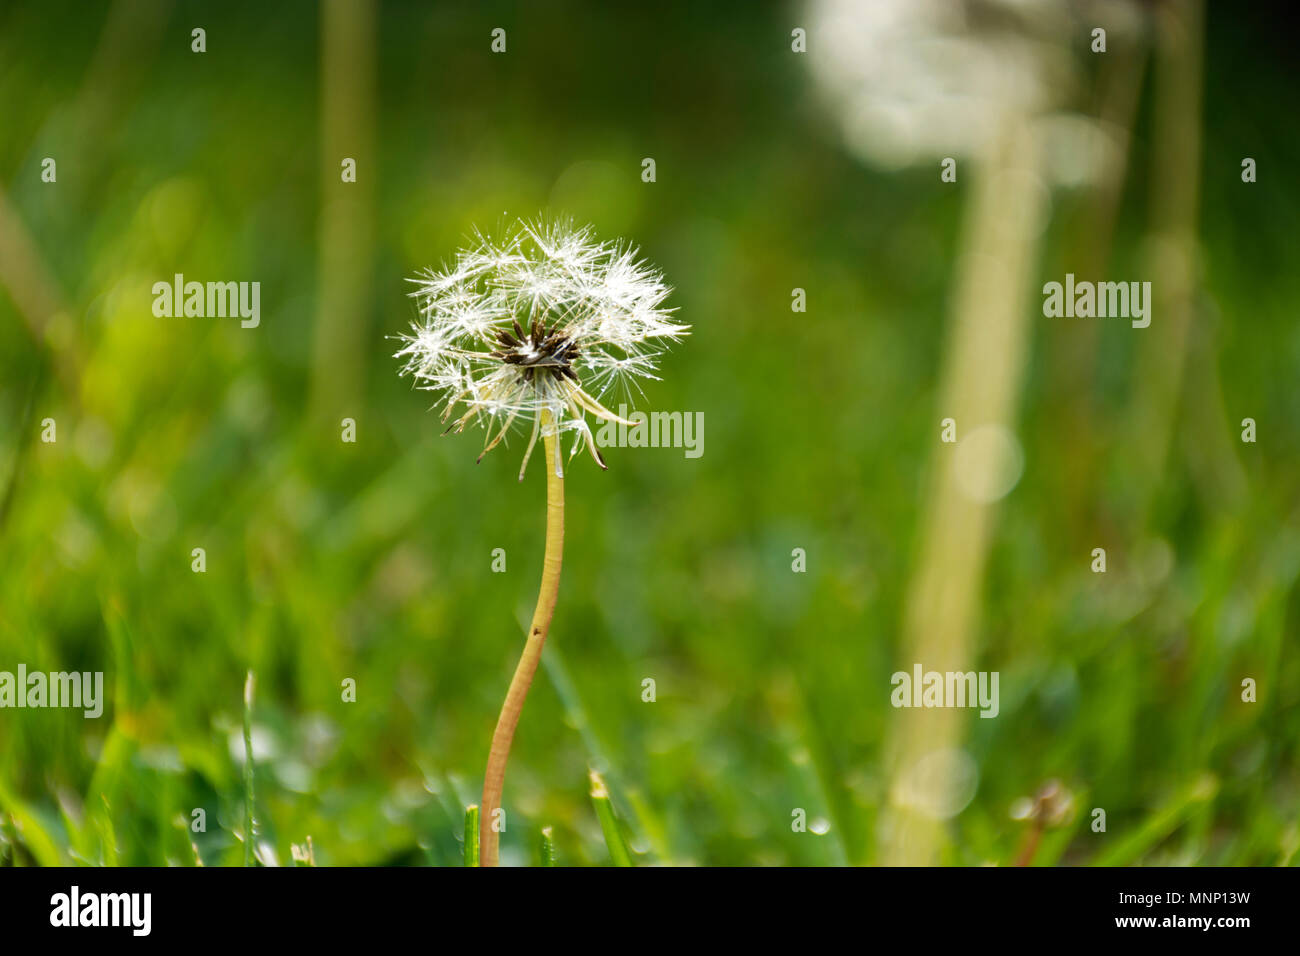 Dandelion with backlight in the garden. Green natural background Stock Photo